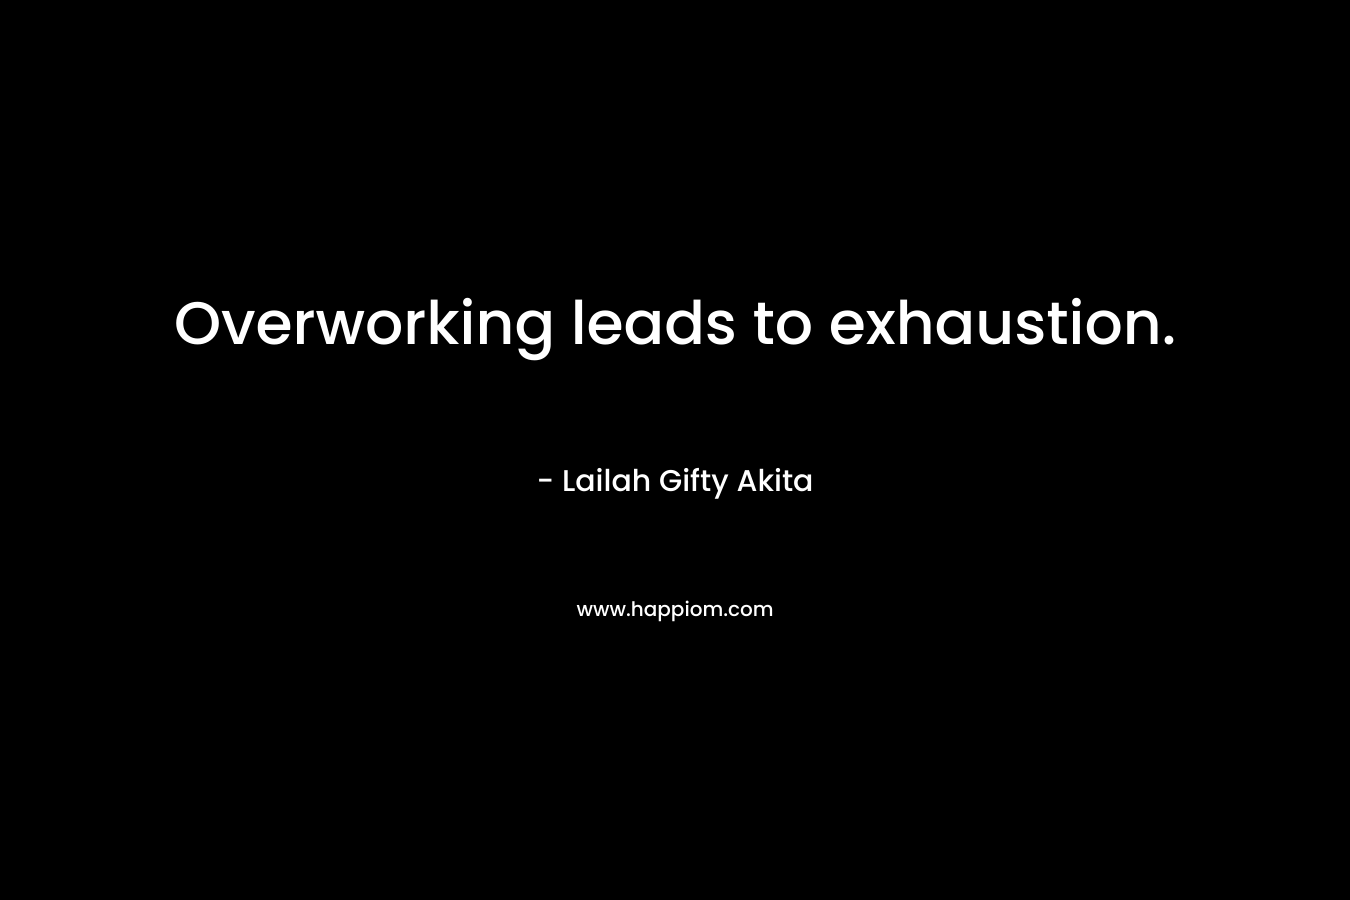 Overworking leads to exhaustion.